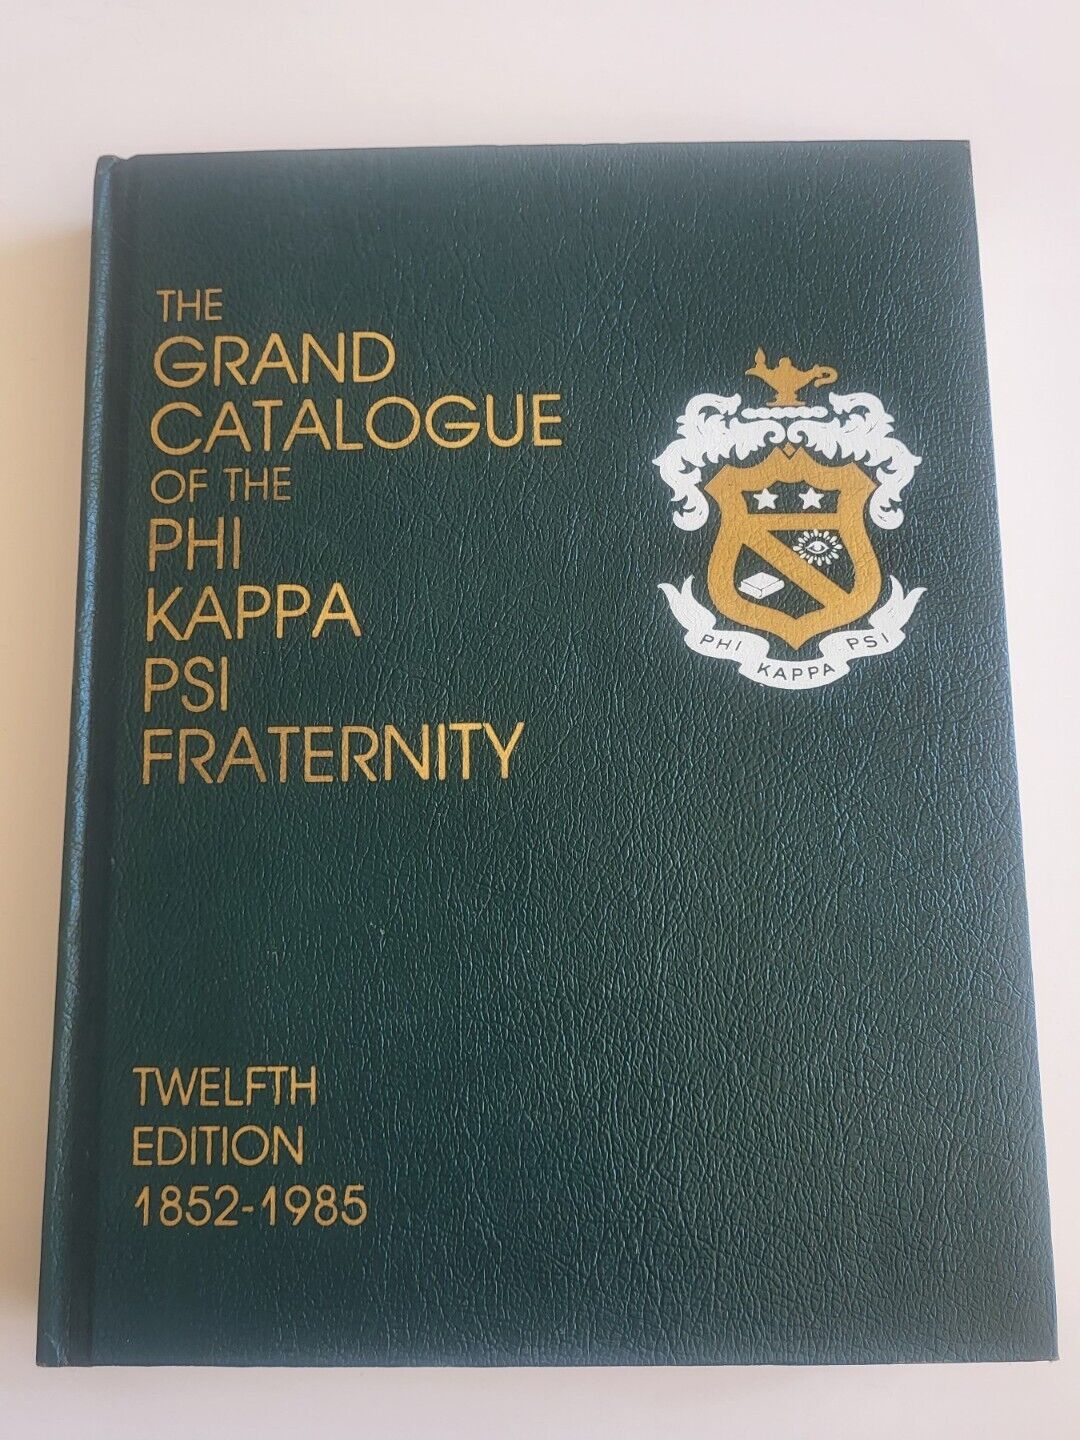 The Grand Catalogue of the PHI Kappa PSI Fraternity 1852-1985 12th Twelfth Ed.